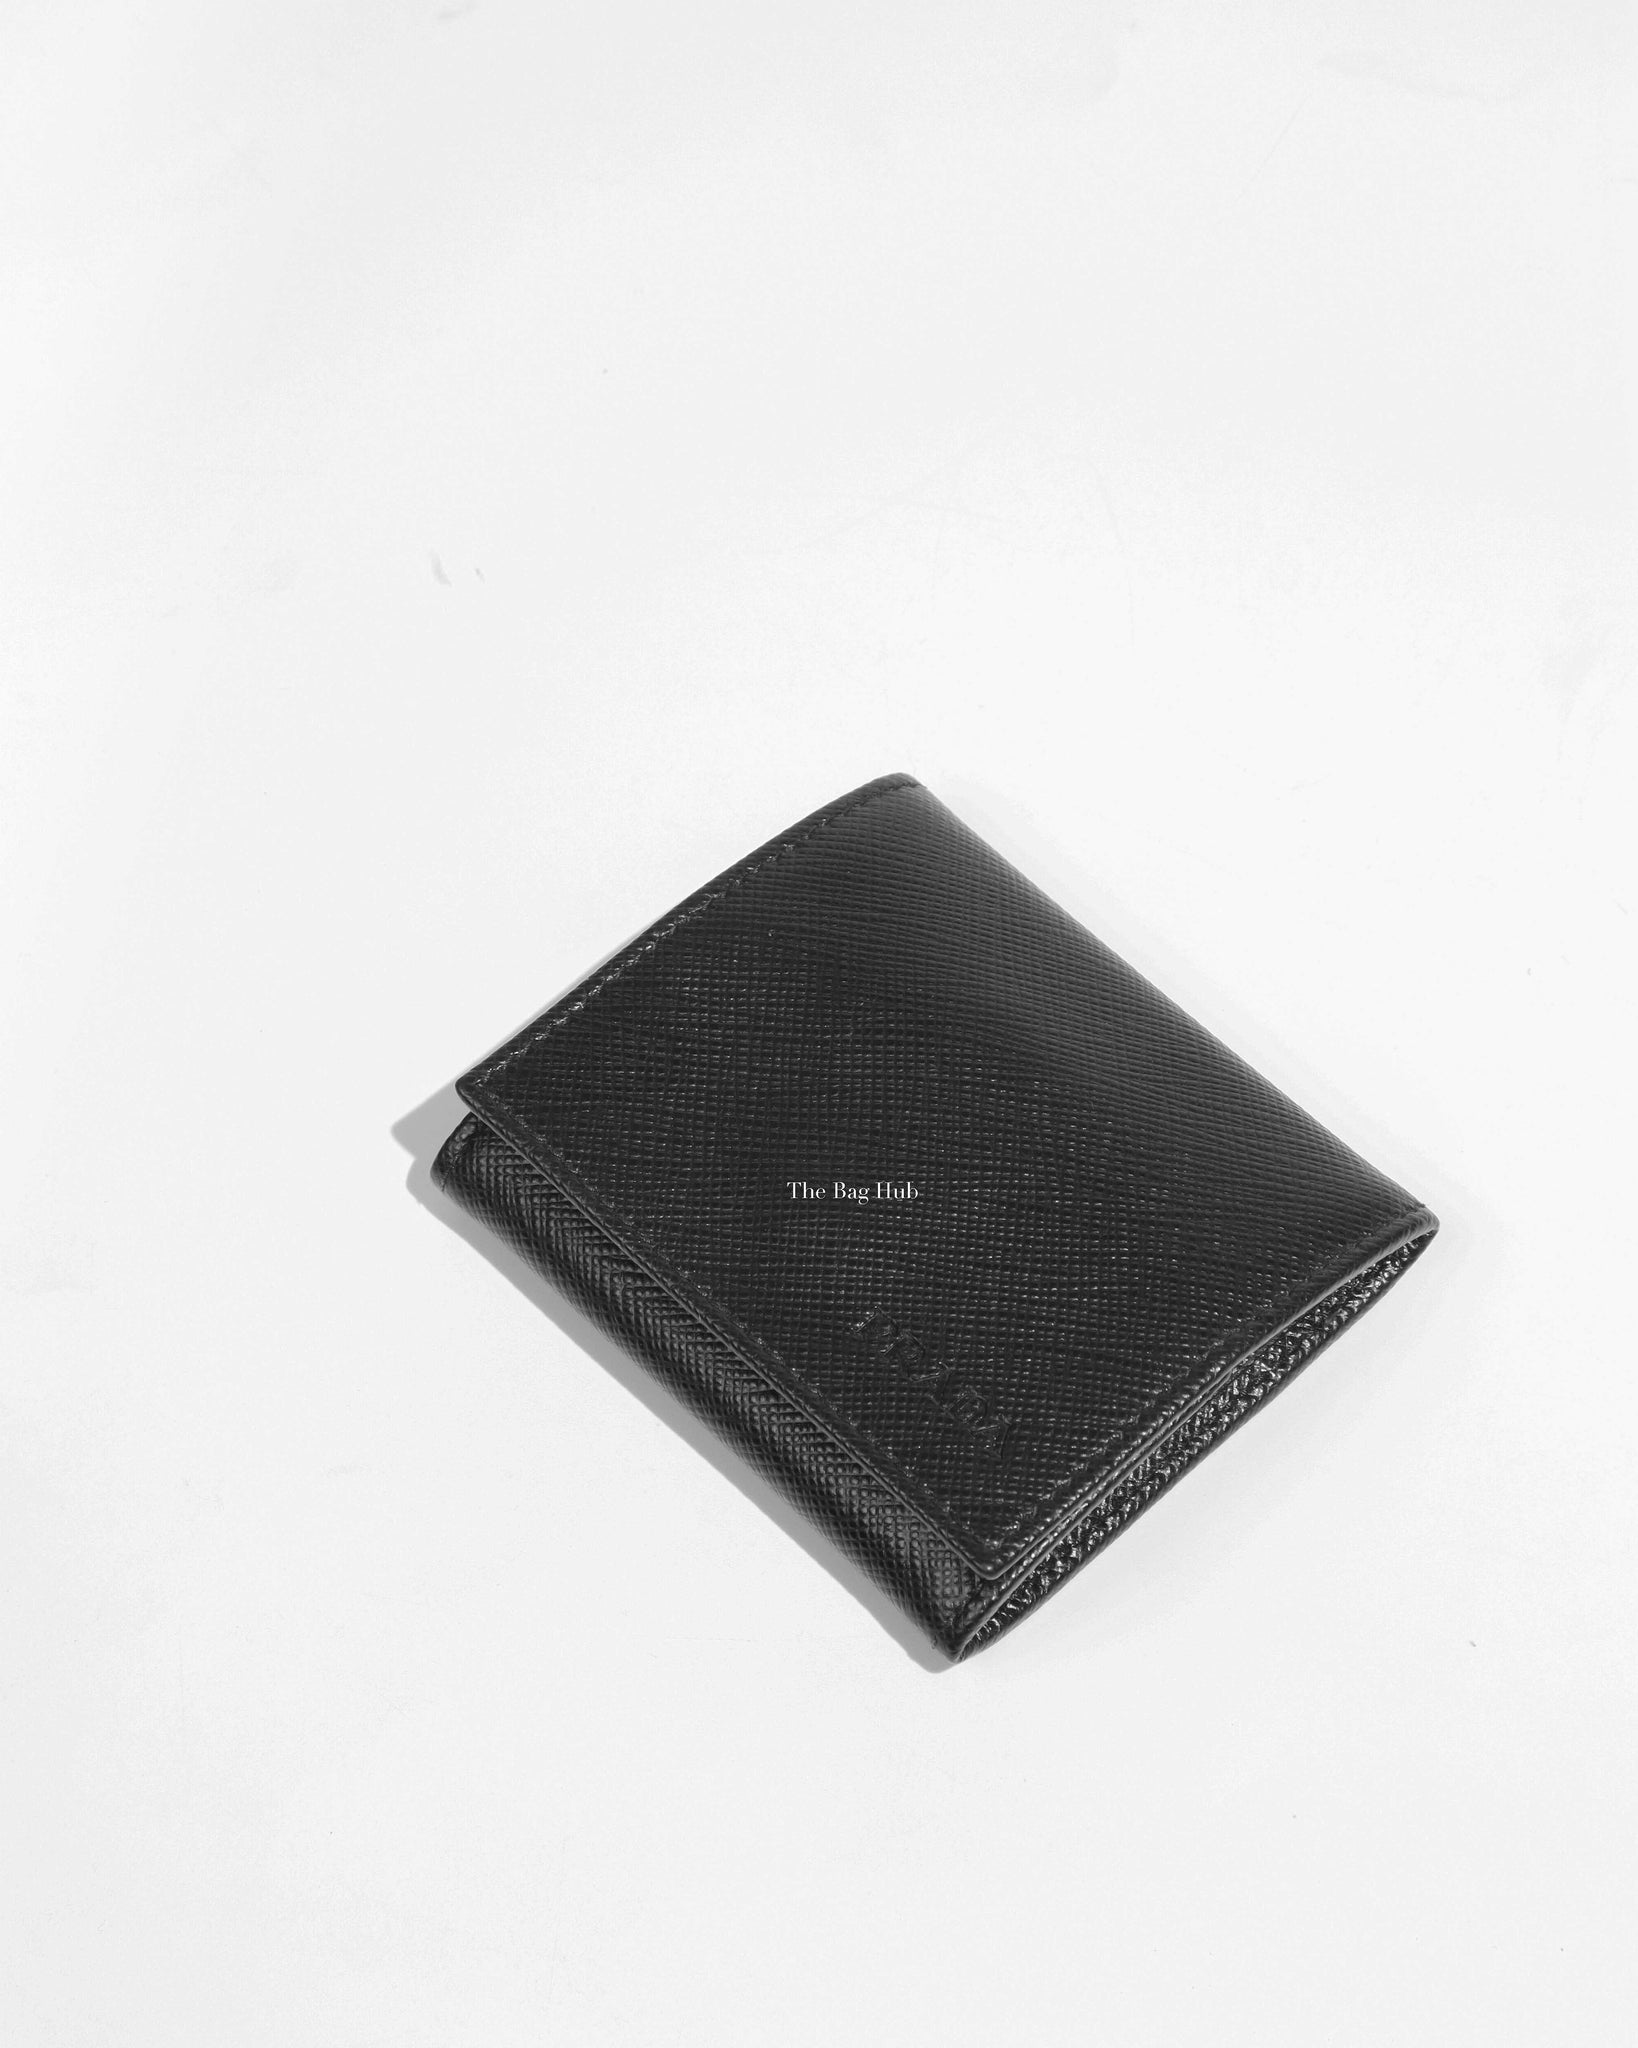 Prada Leather Card Holder Black in Saffiano Leather with Silver